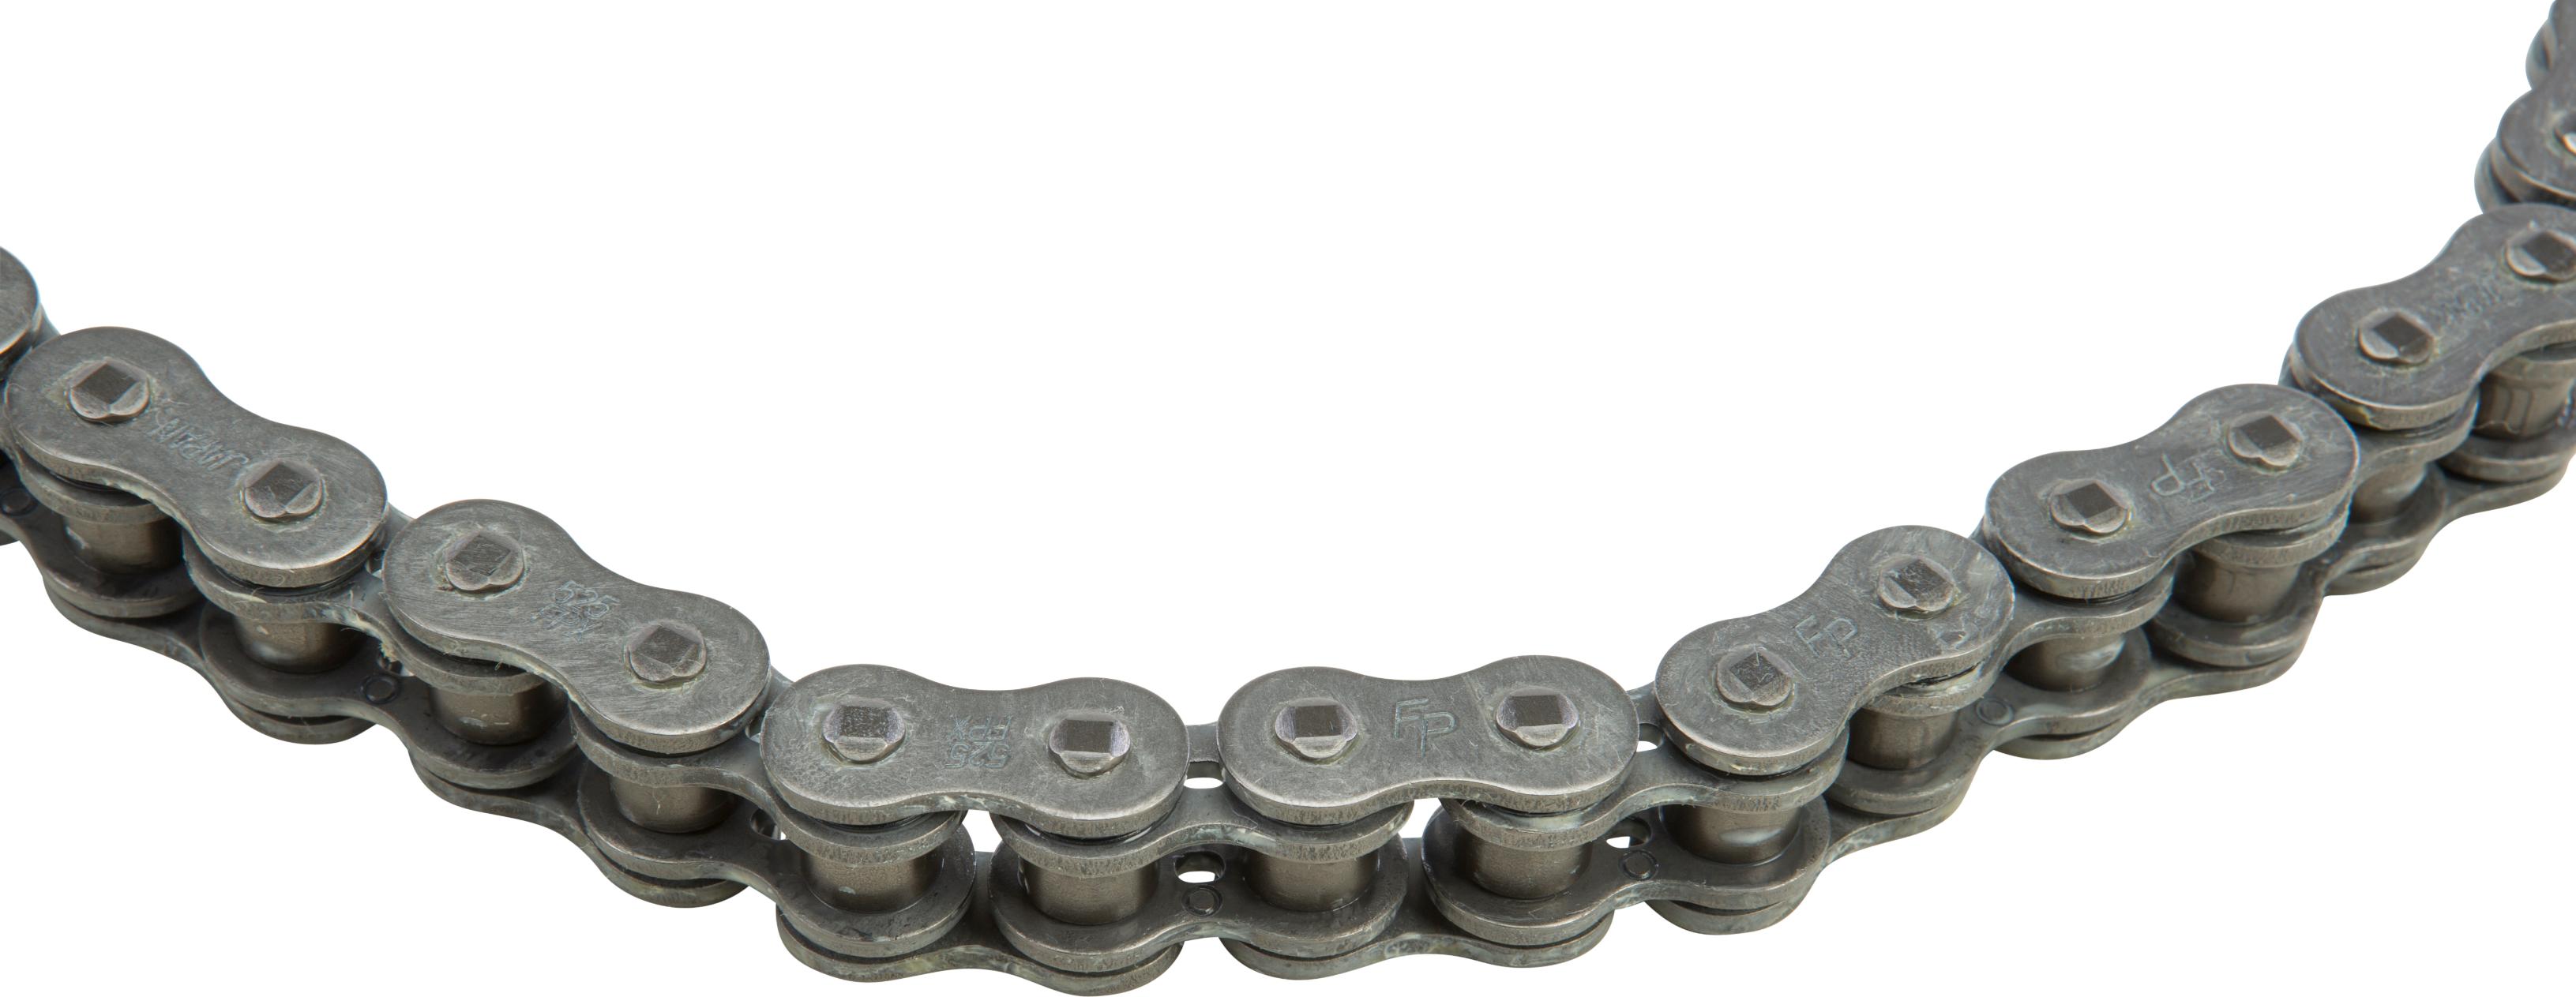 Fire Power - X-ring Chain 525x120 - 525FPX-120